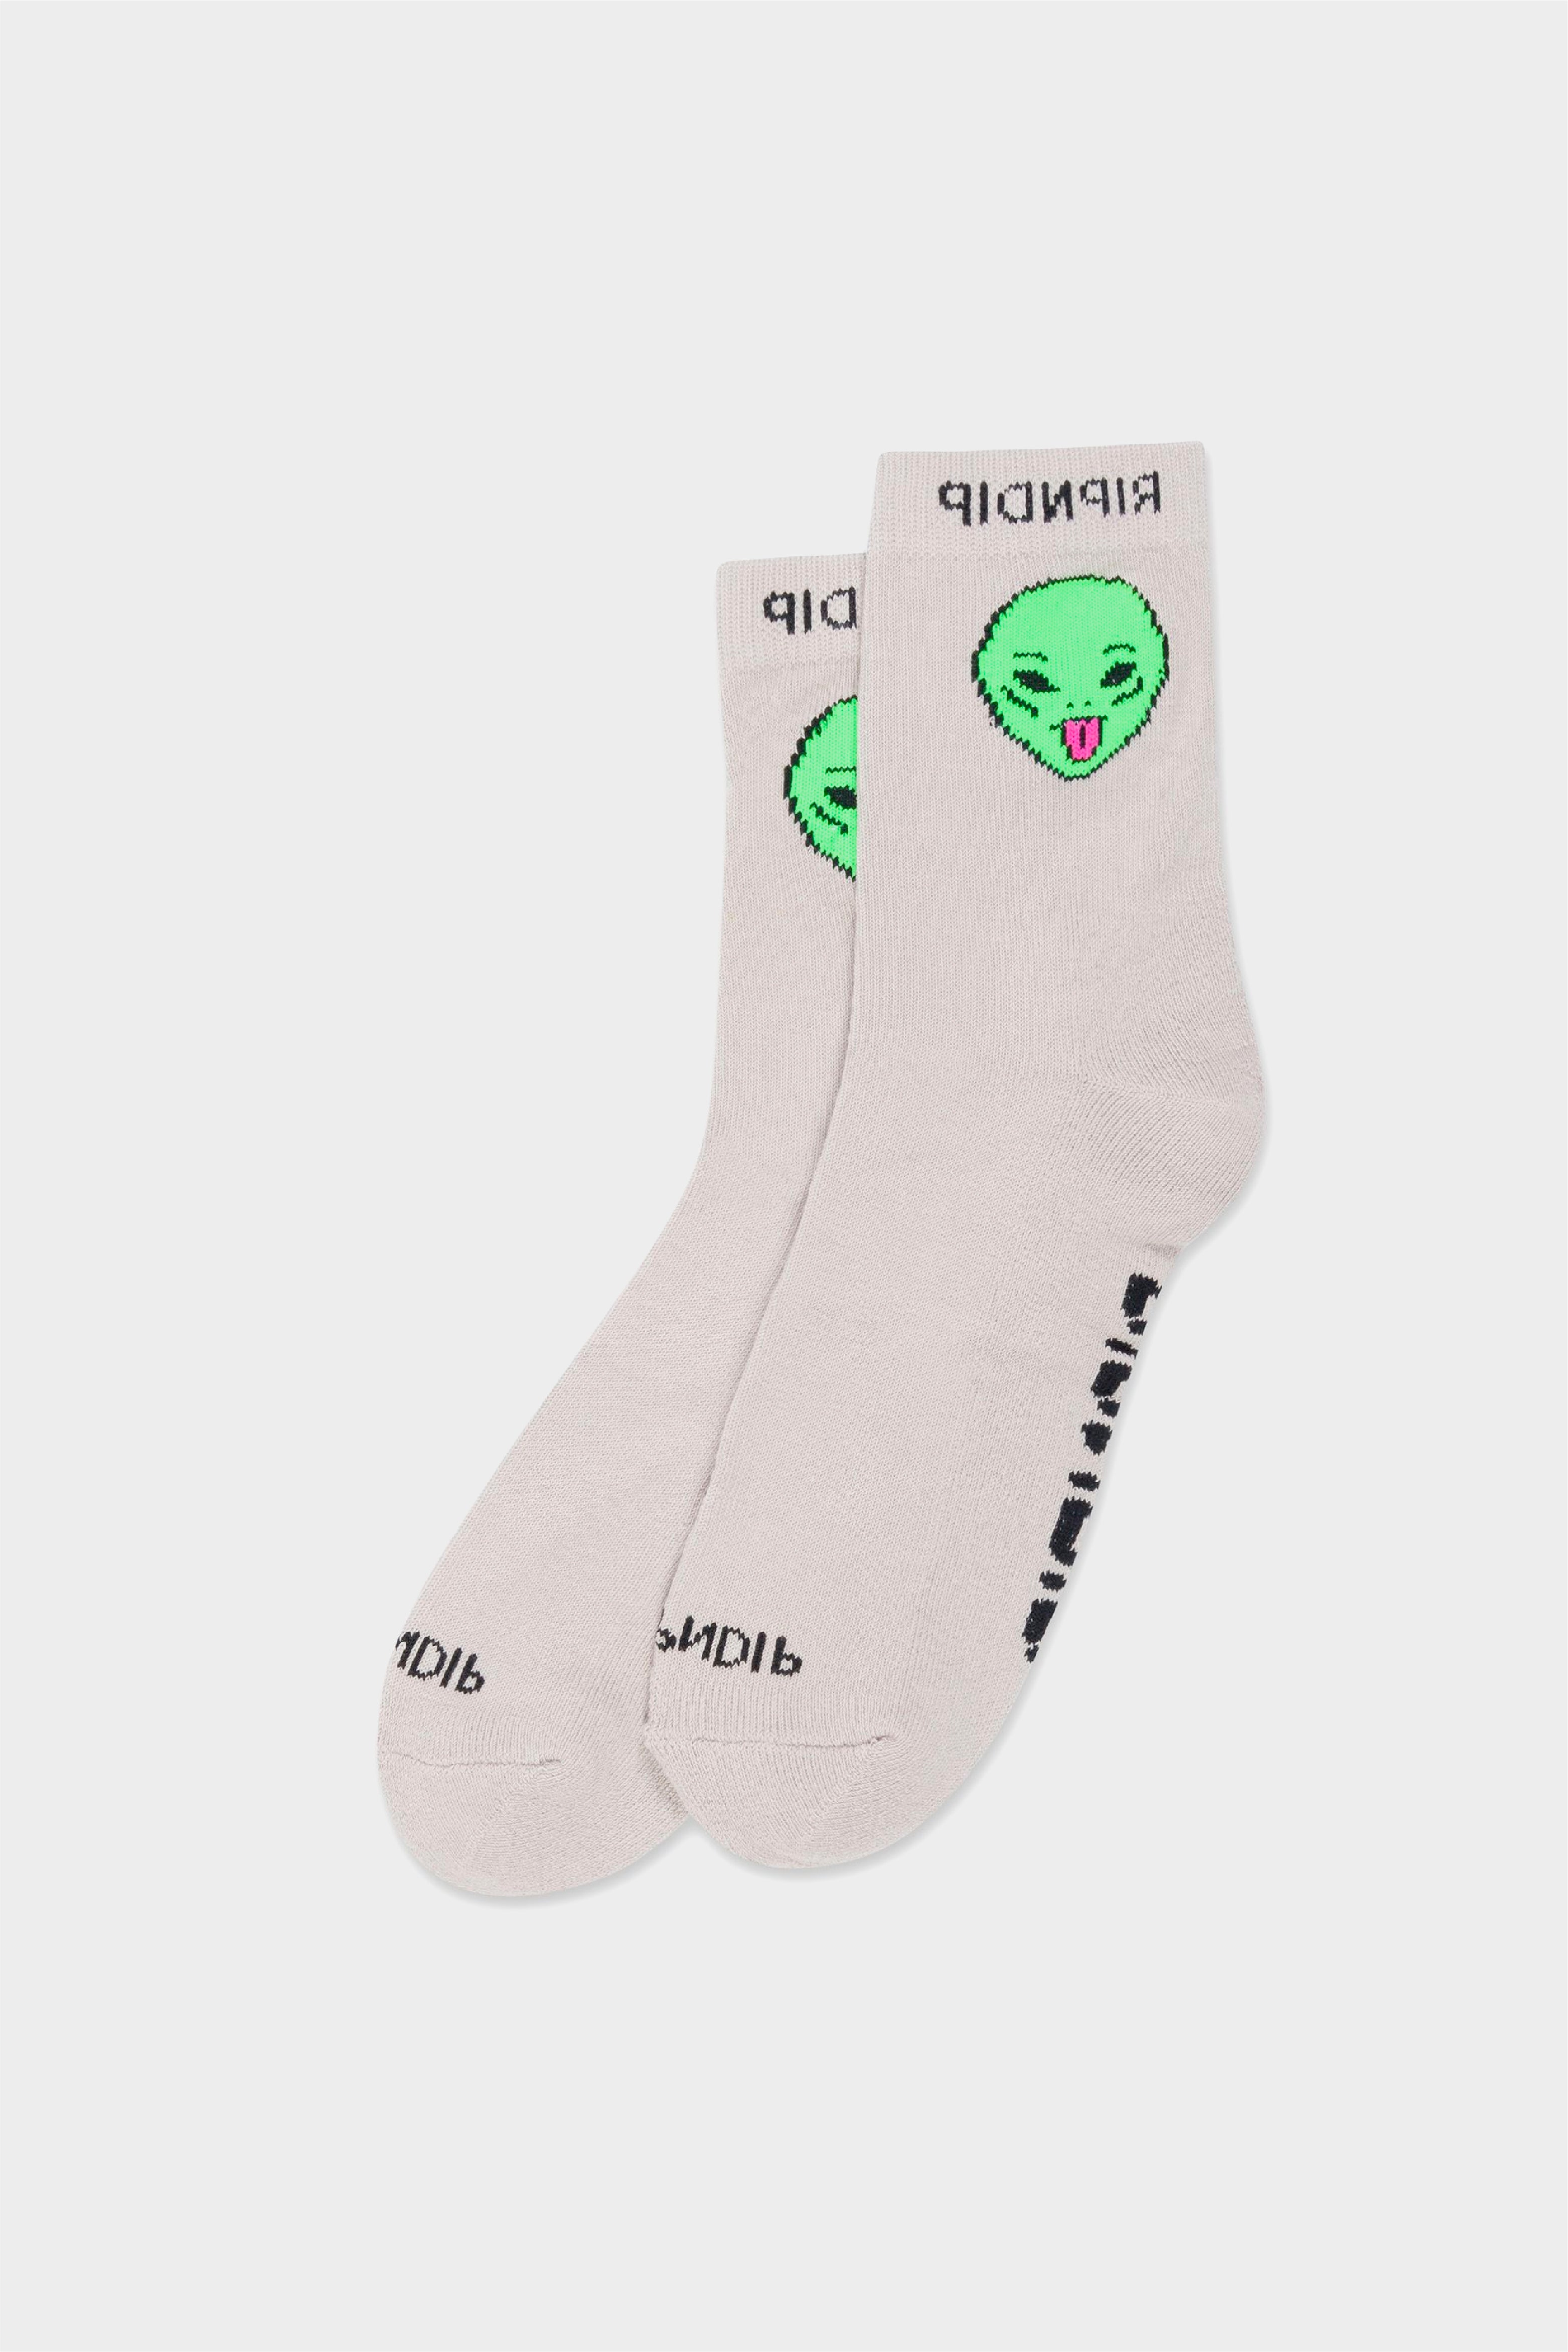 Selectshop FRAME - RIPNDIP We Out Here Mid Socks All-Accessories Concept Store Dubai